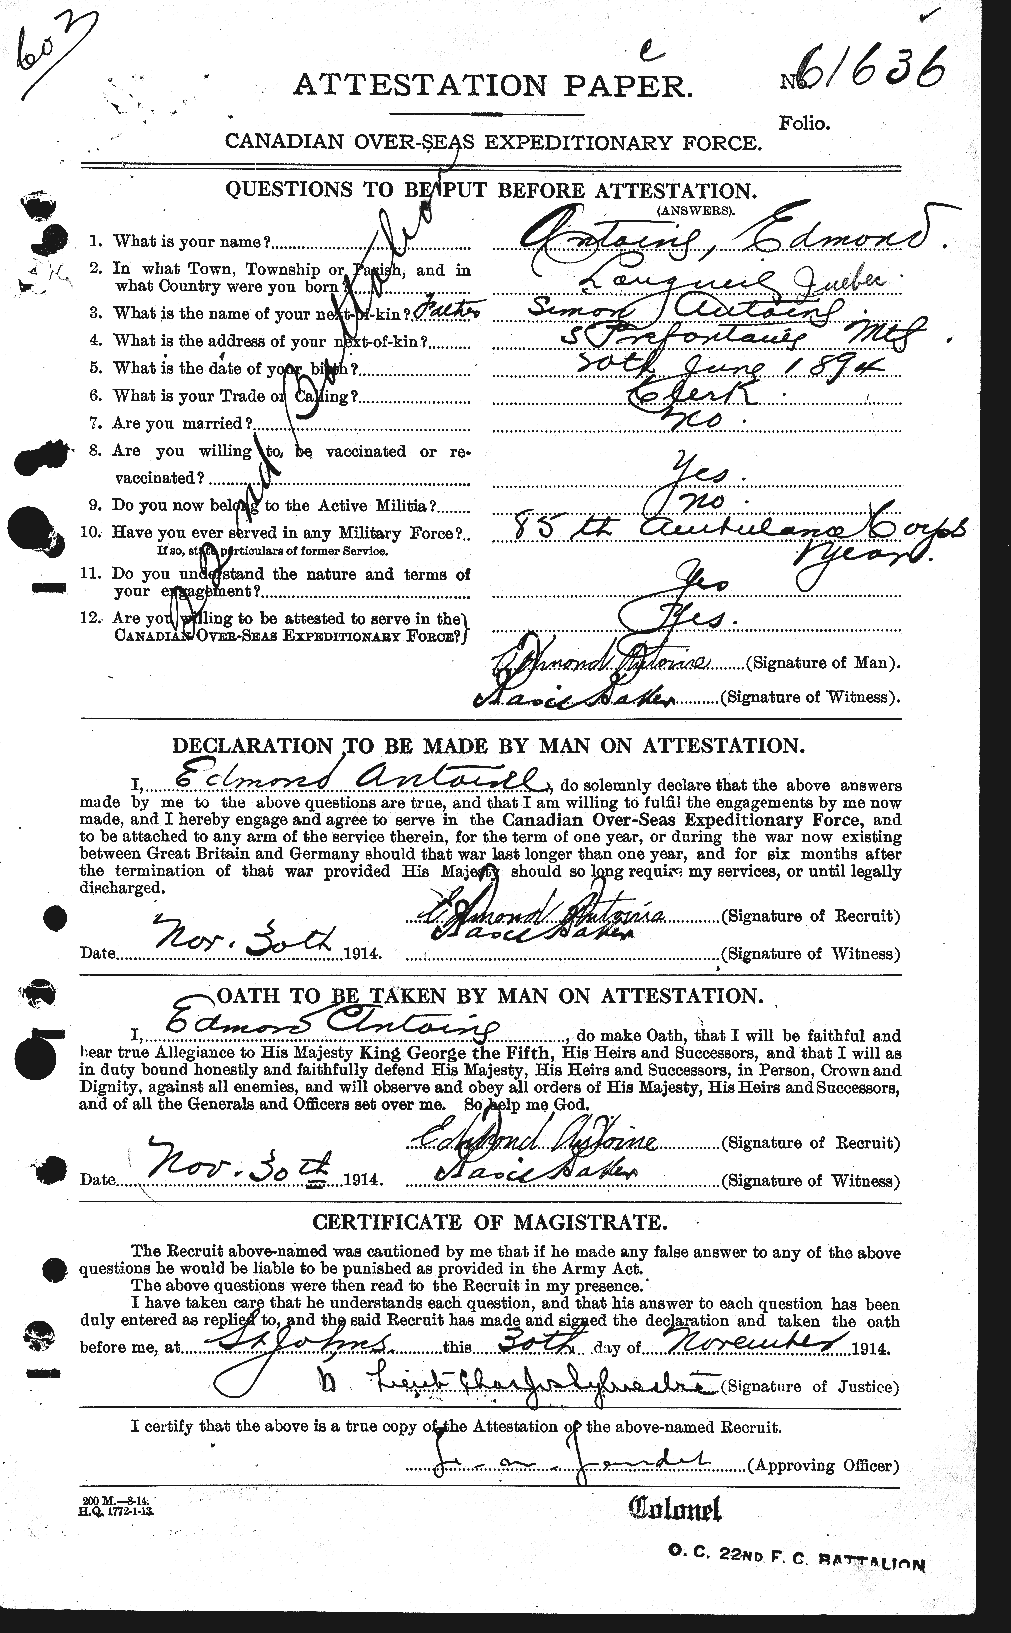 Personnel Records of the First World War - CEF 212118a